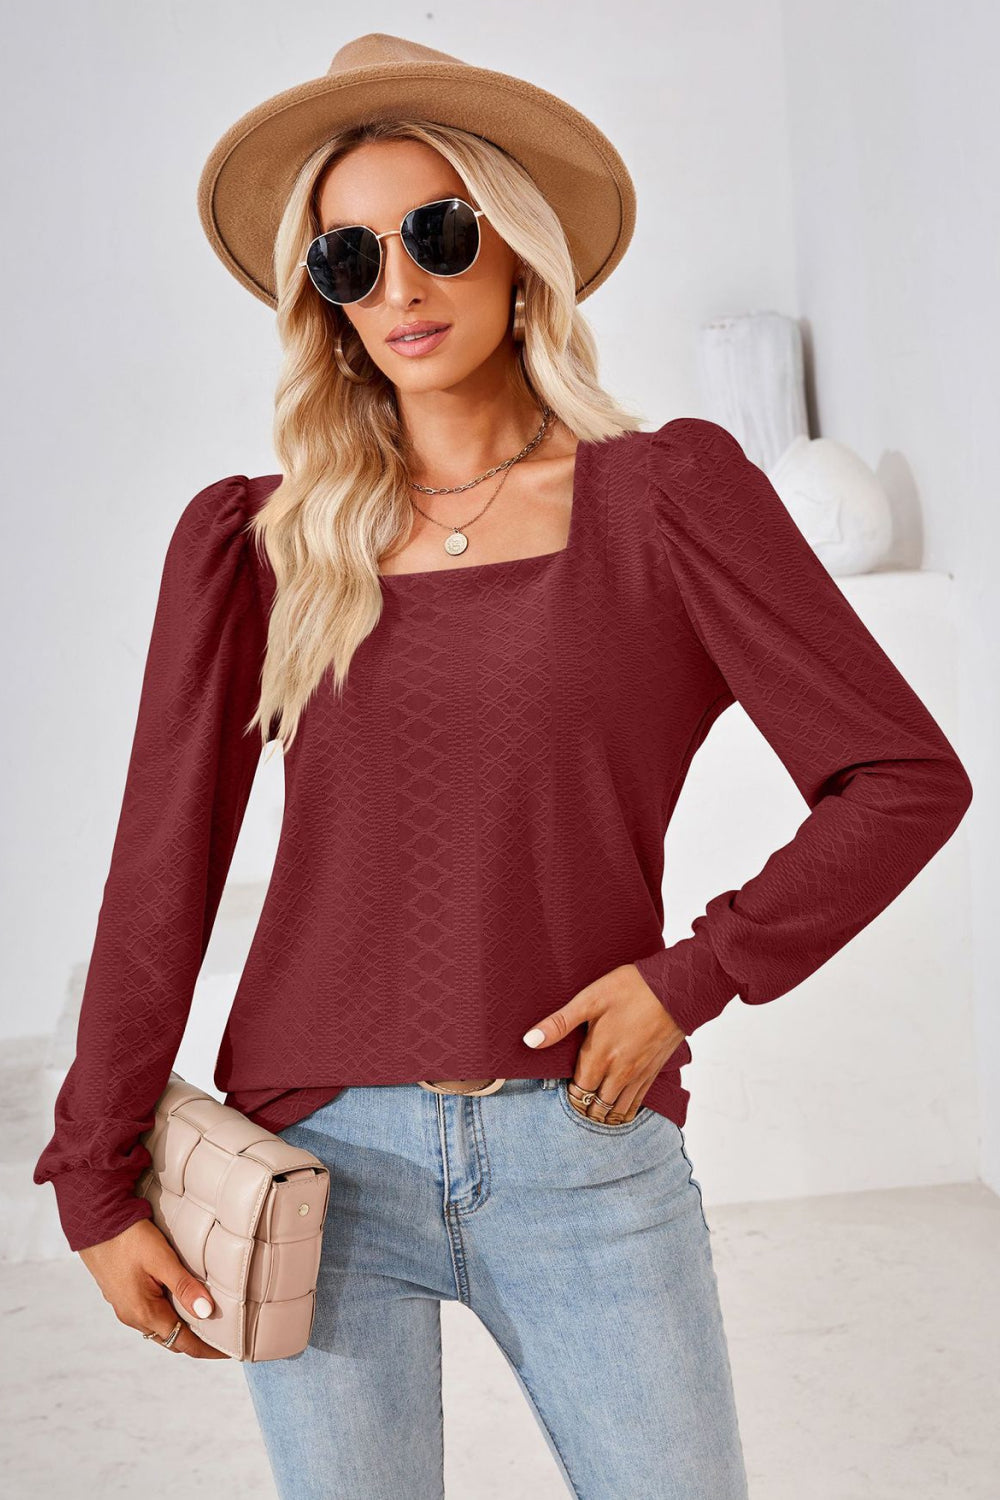 Square Neck Puff Sleeve Blouse - Dark Red / S - Women’s Clothing & Accessories - Shirts & Tops - 15 - 2024